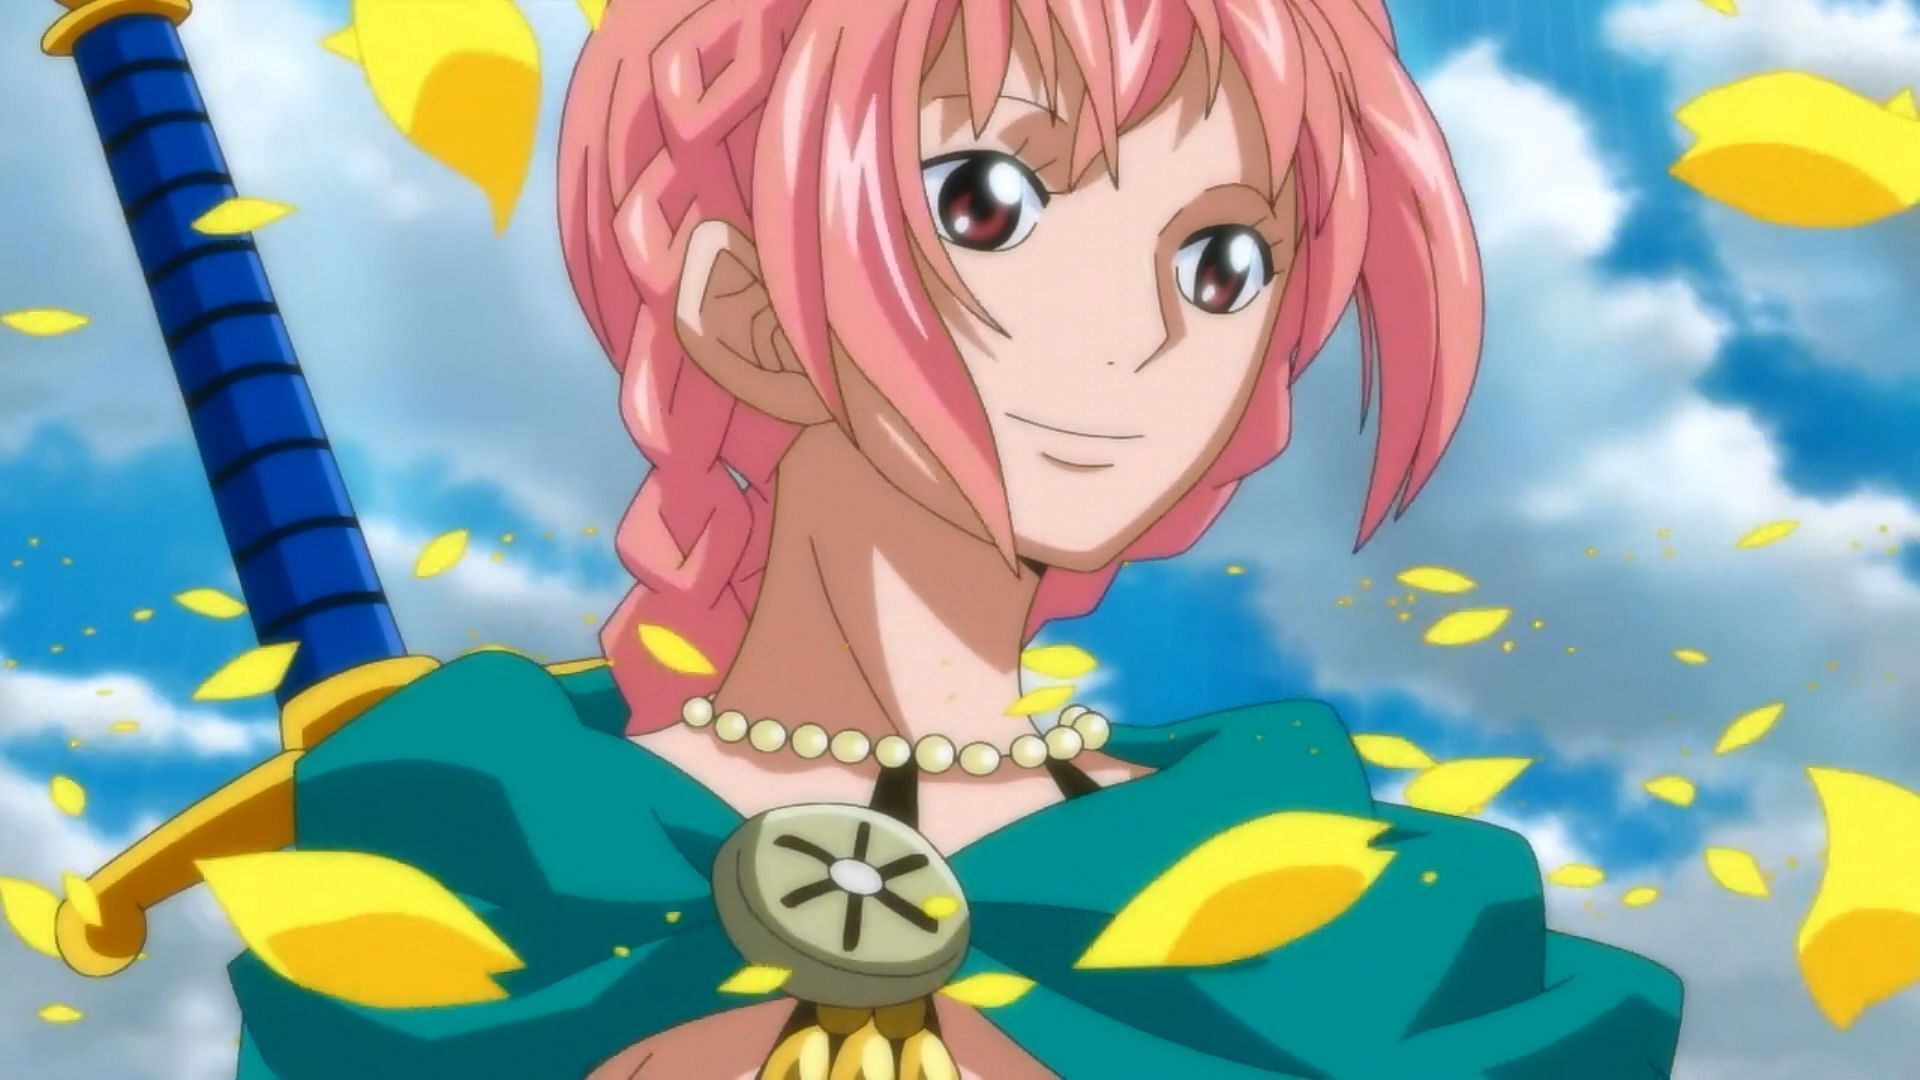 Rebecca as seen in the anime series (Image via Toei Animation)